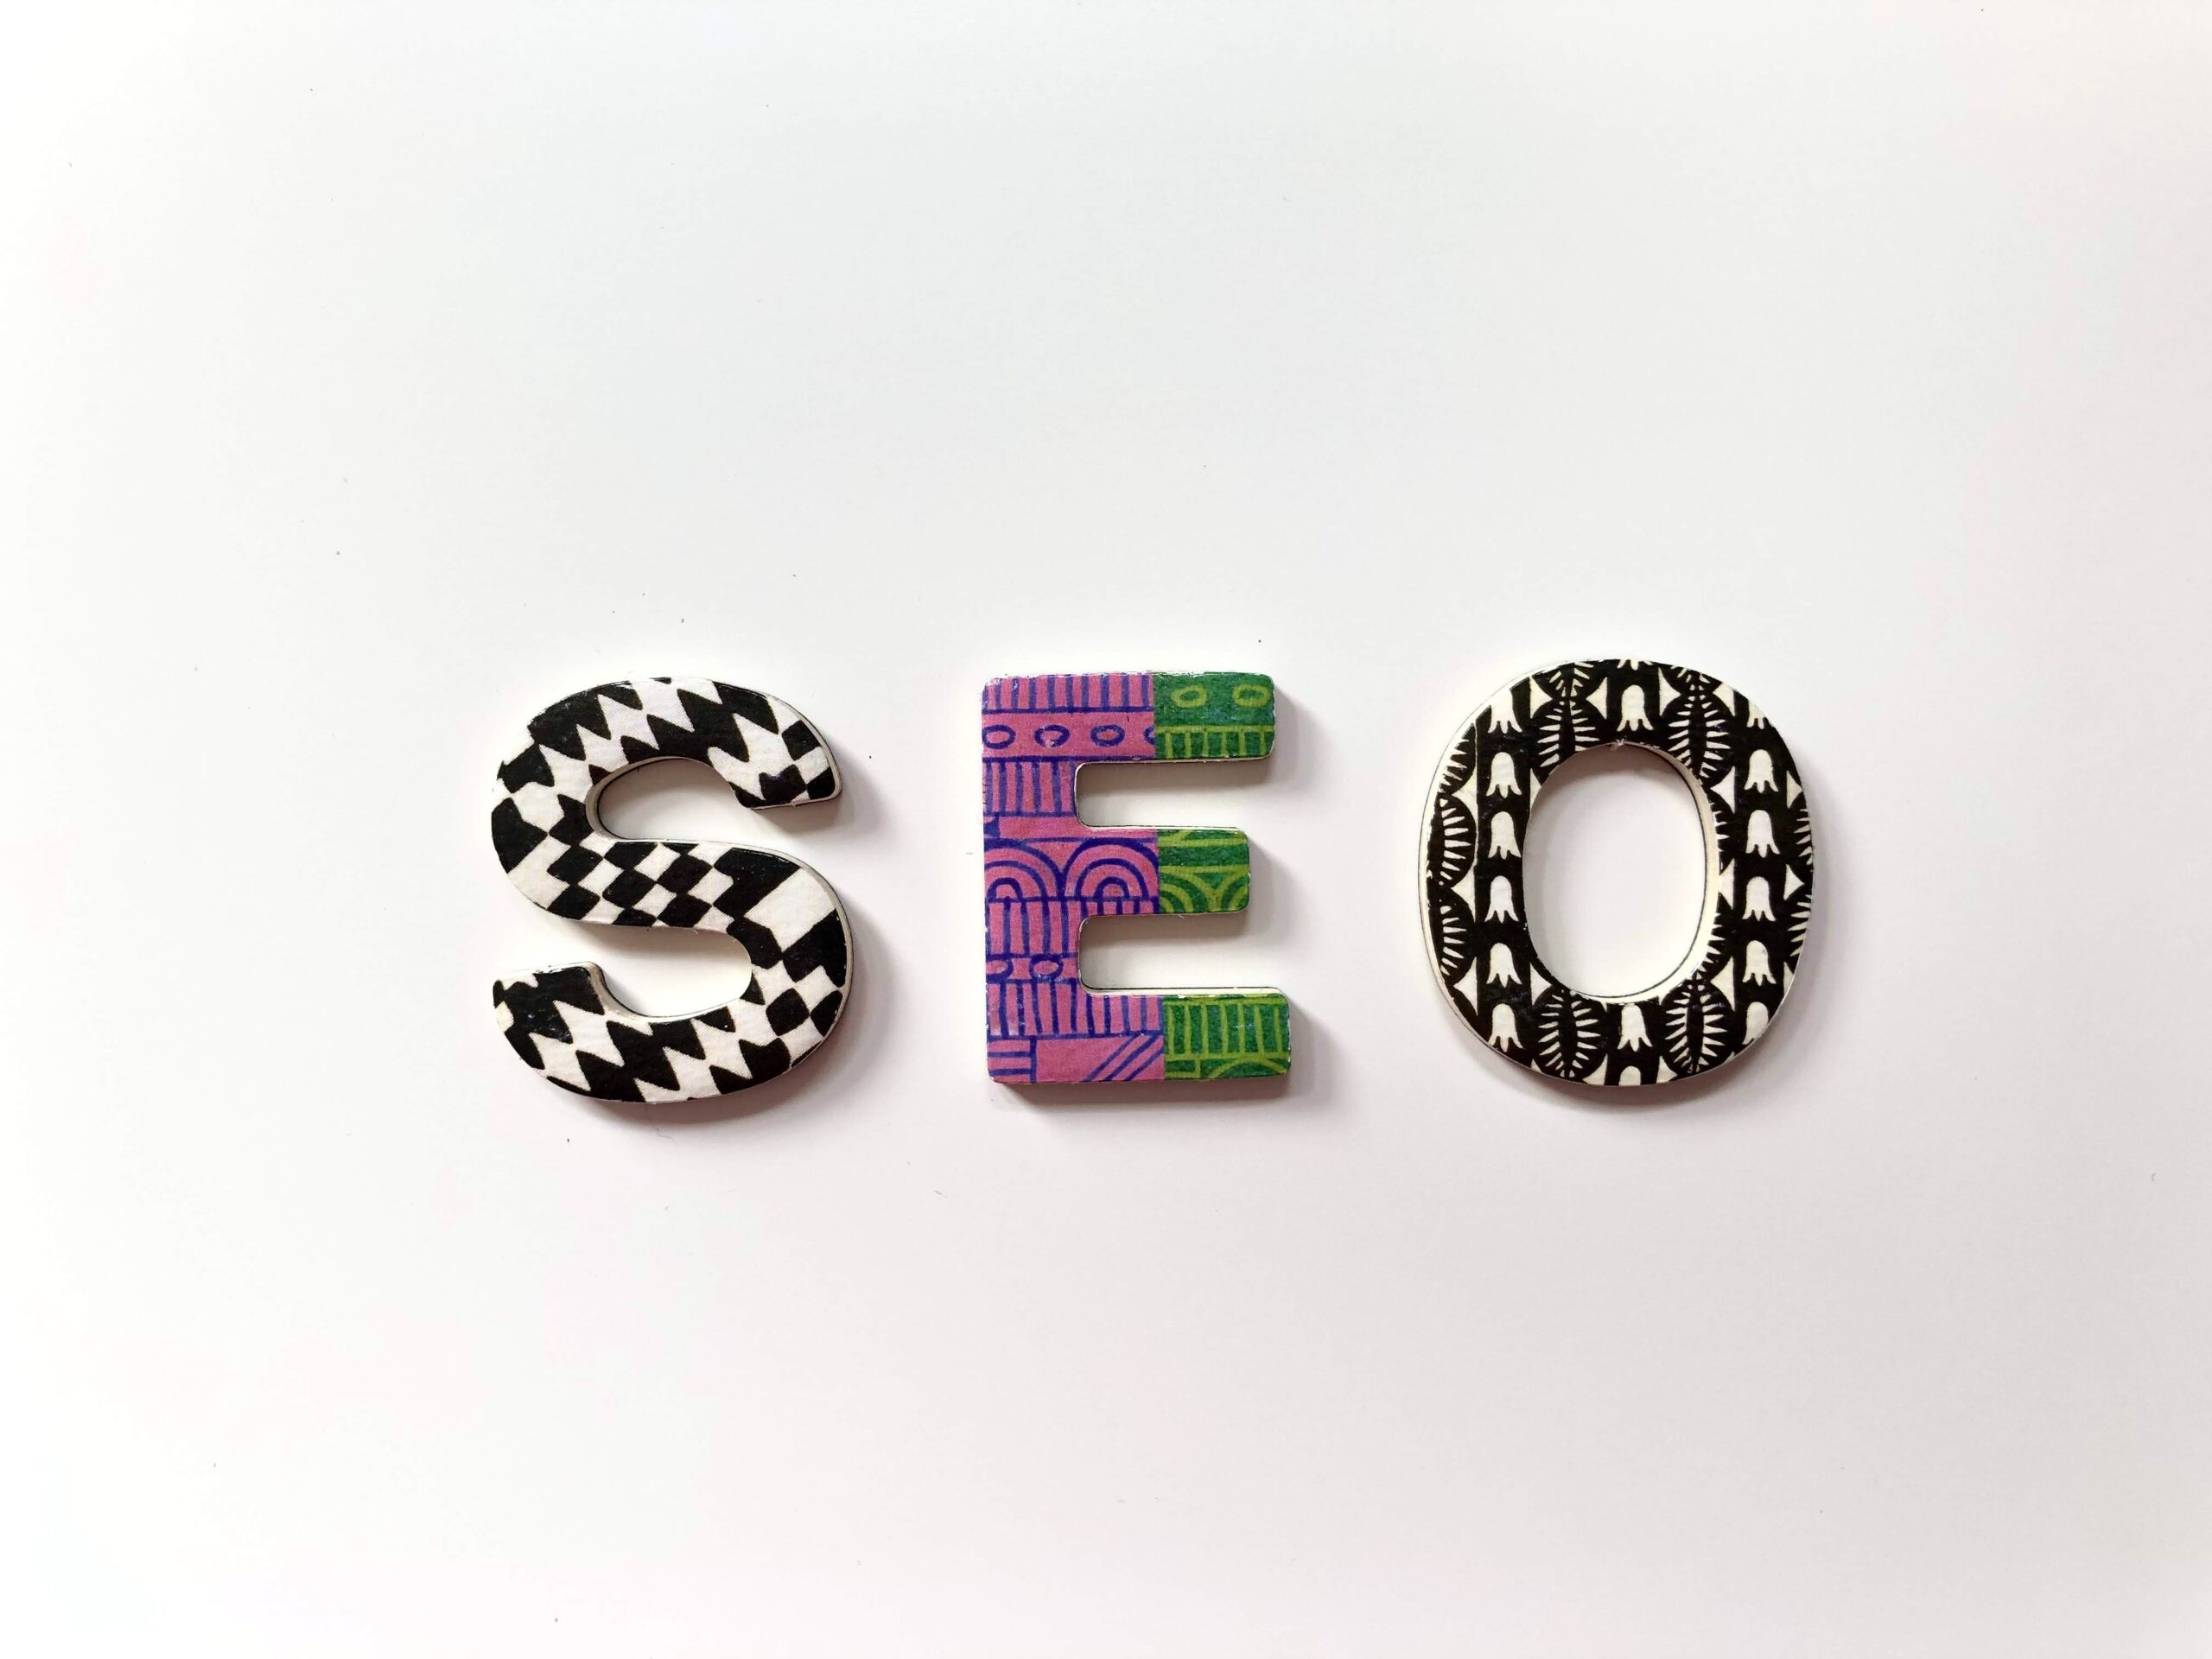 4 Signs That You Need to Reevaluate Your SEO Strategy